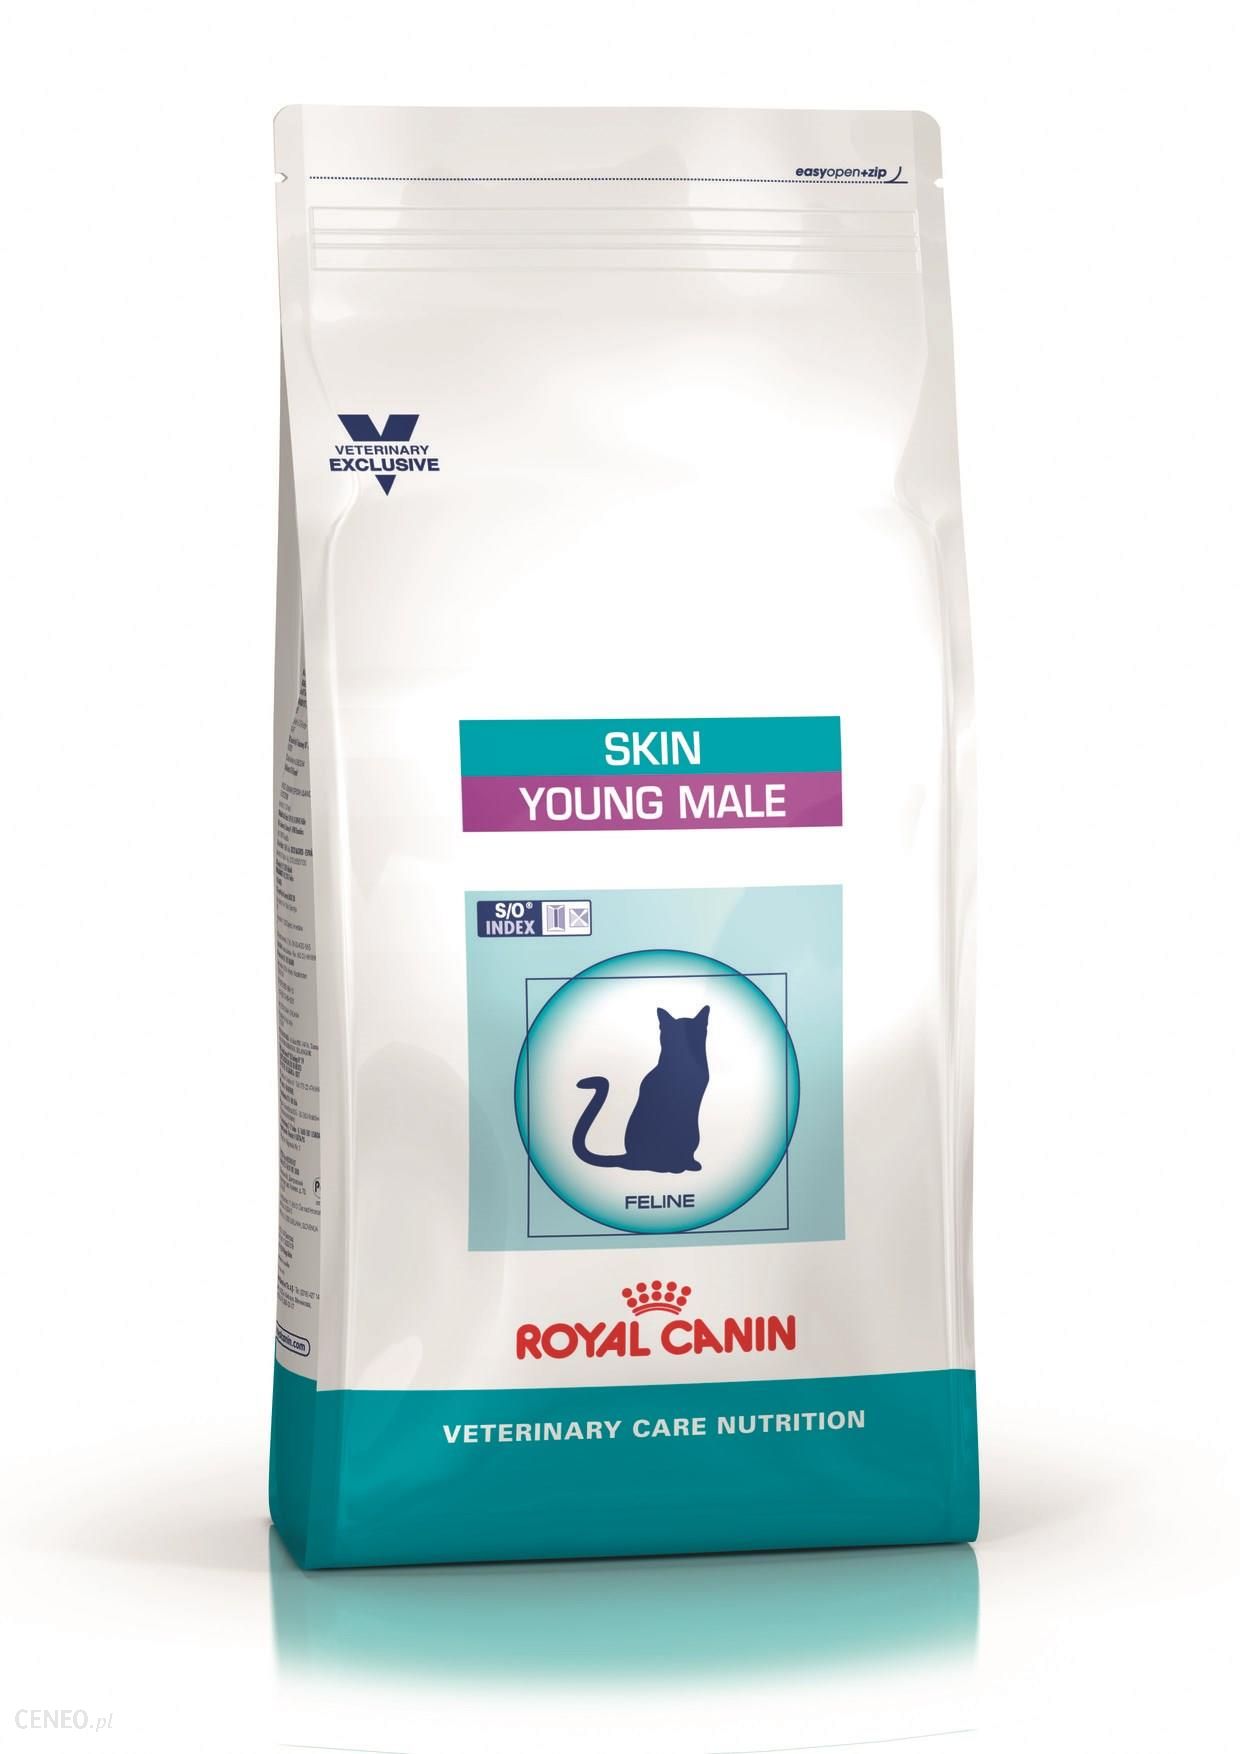 Royal Canin Veterinary Care Nutrition Skin Young Male 3